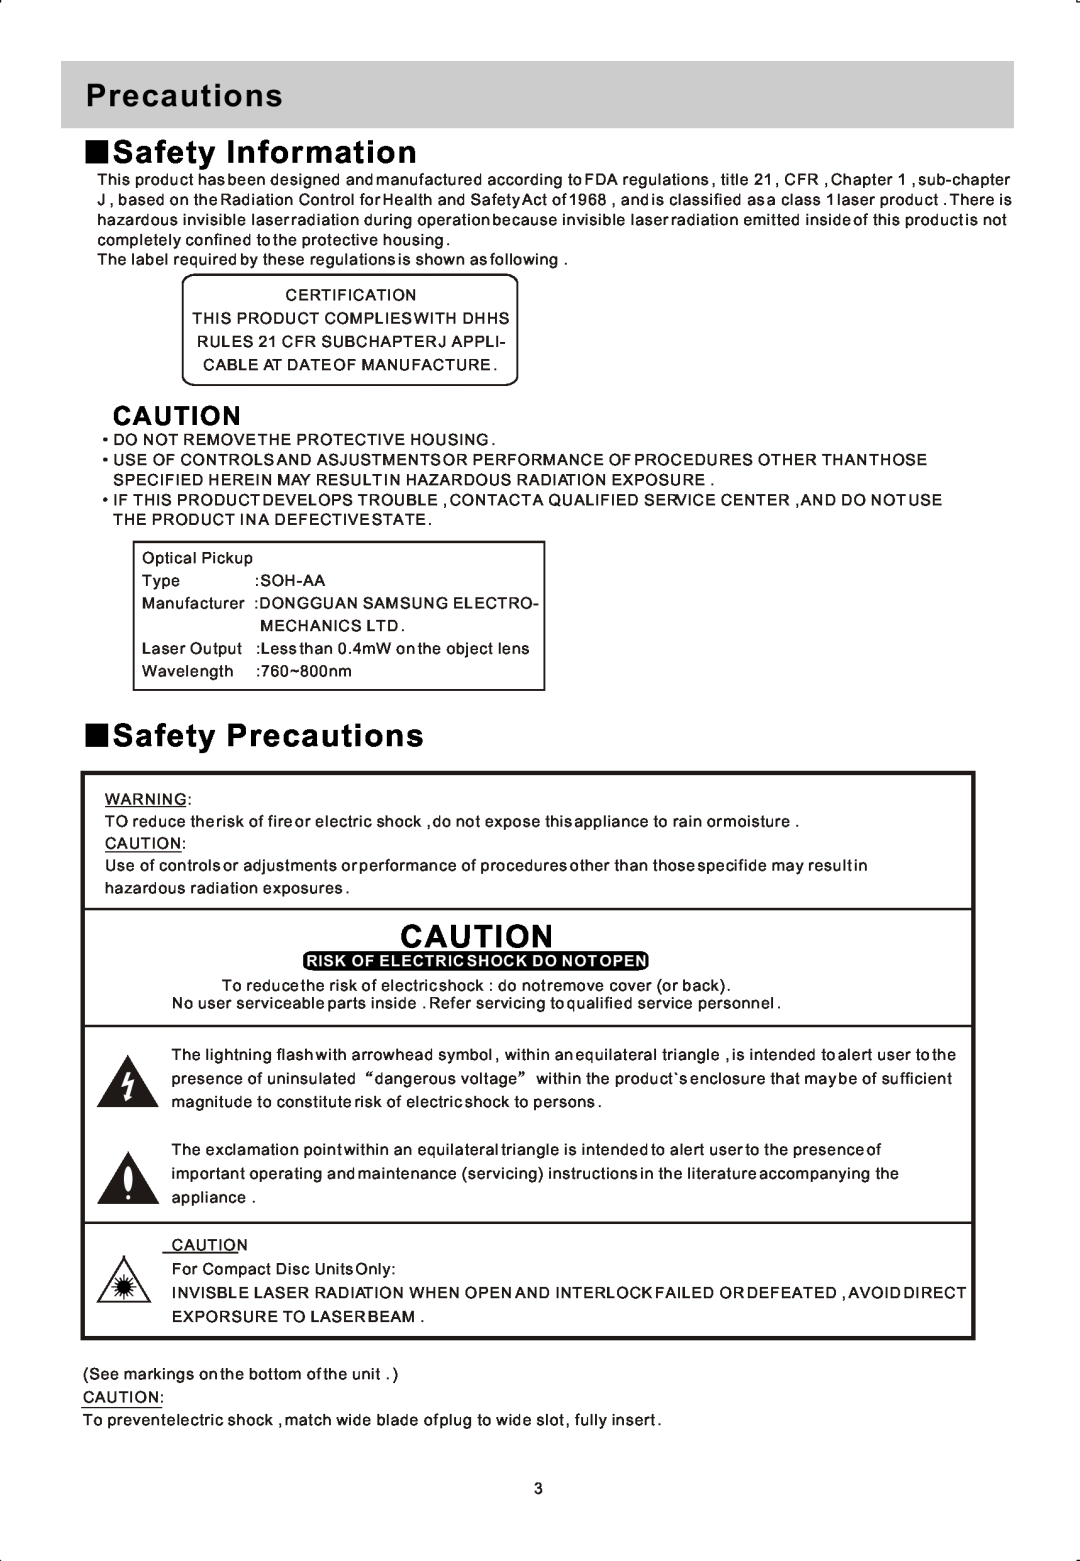 Sylvania SRCD822 manual Precautions Safety Information, Safety Precautions, Risk Of Electric Shock Do Not Open 